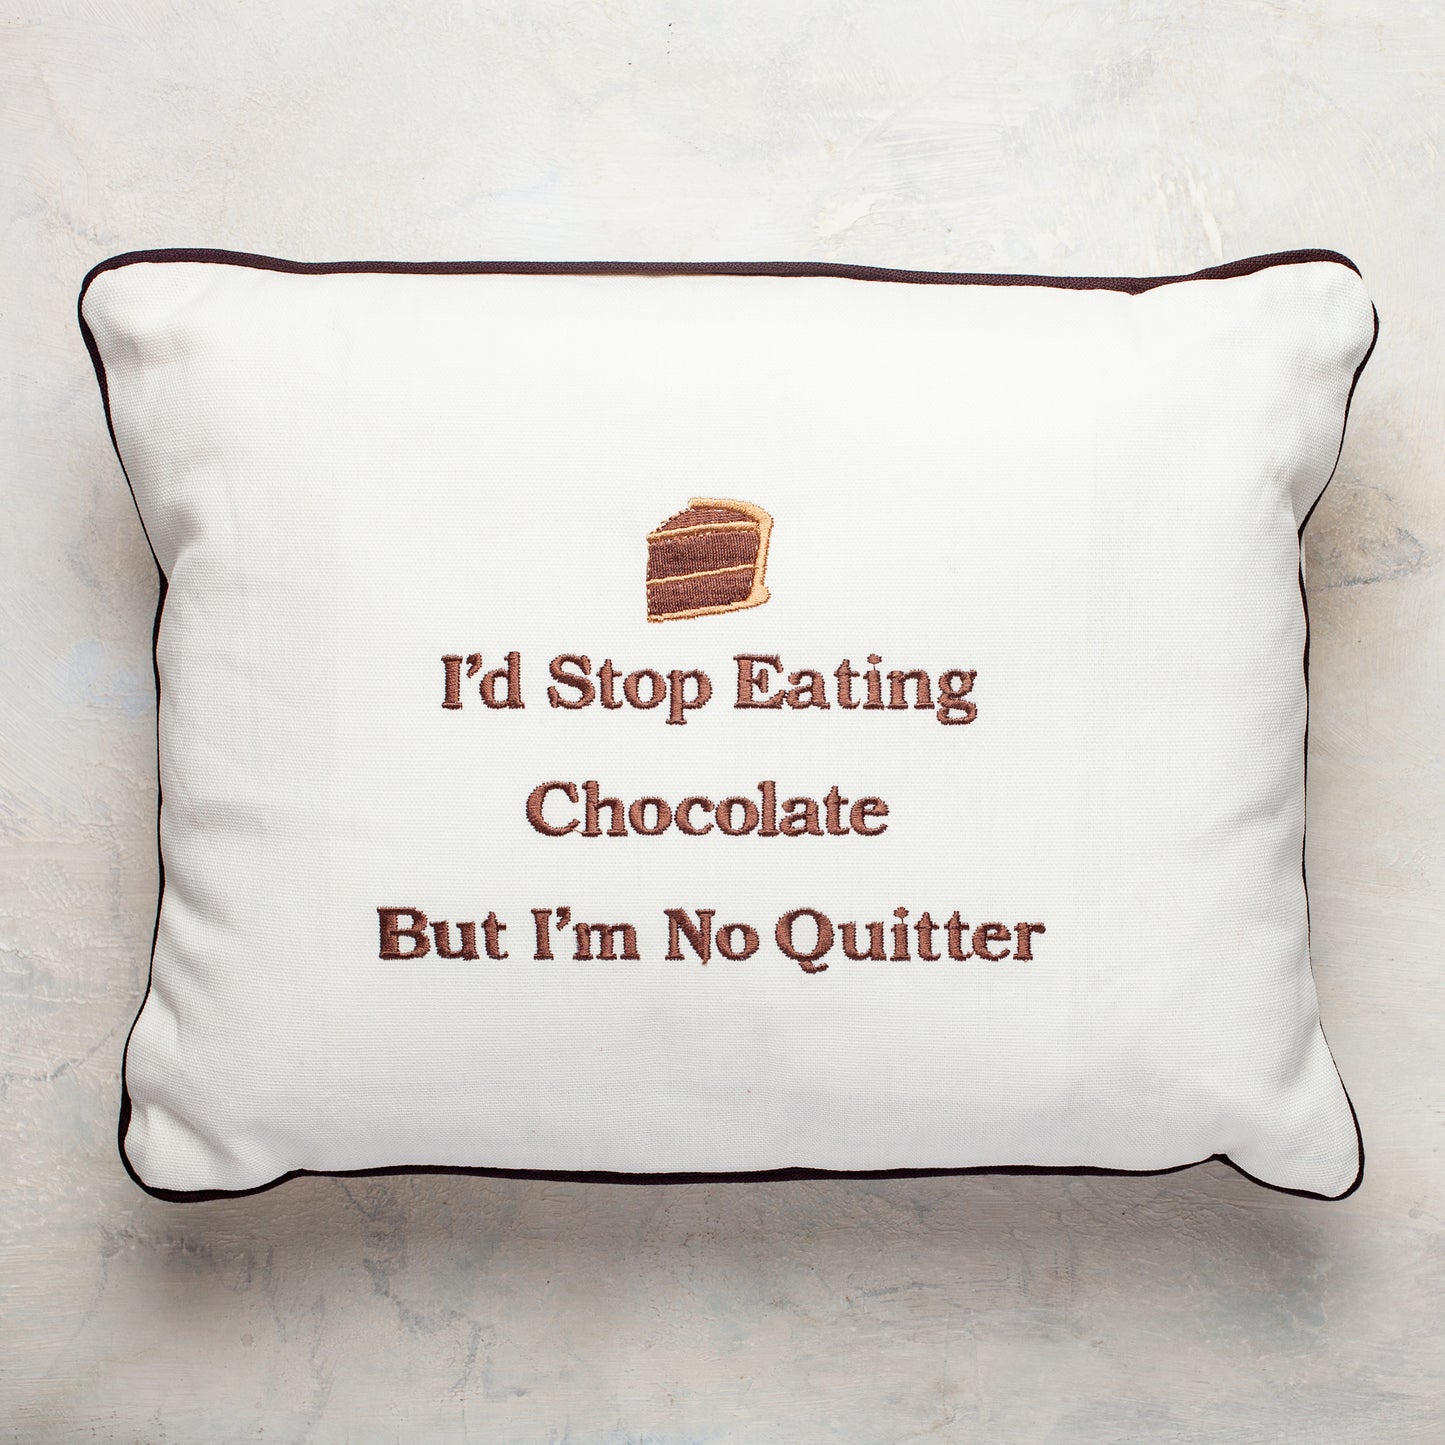 "I'd stop eating chocolate but I'm no quitter " embroidered pillow from William Greenberg Desserts